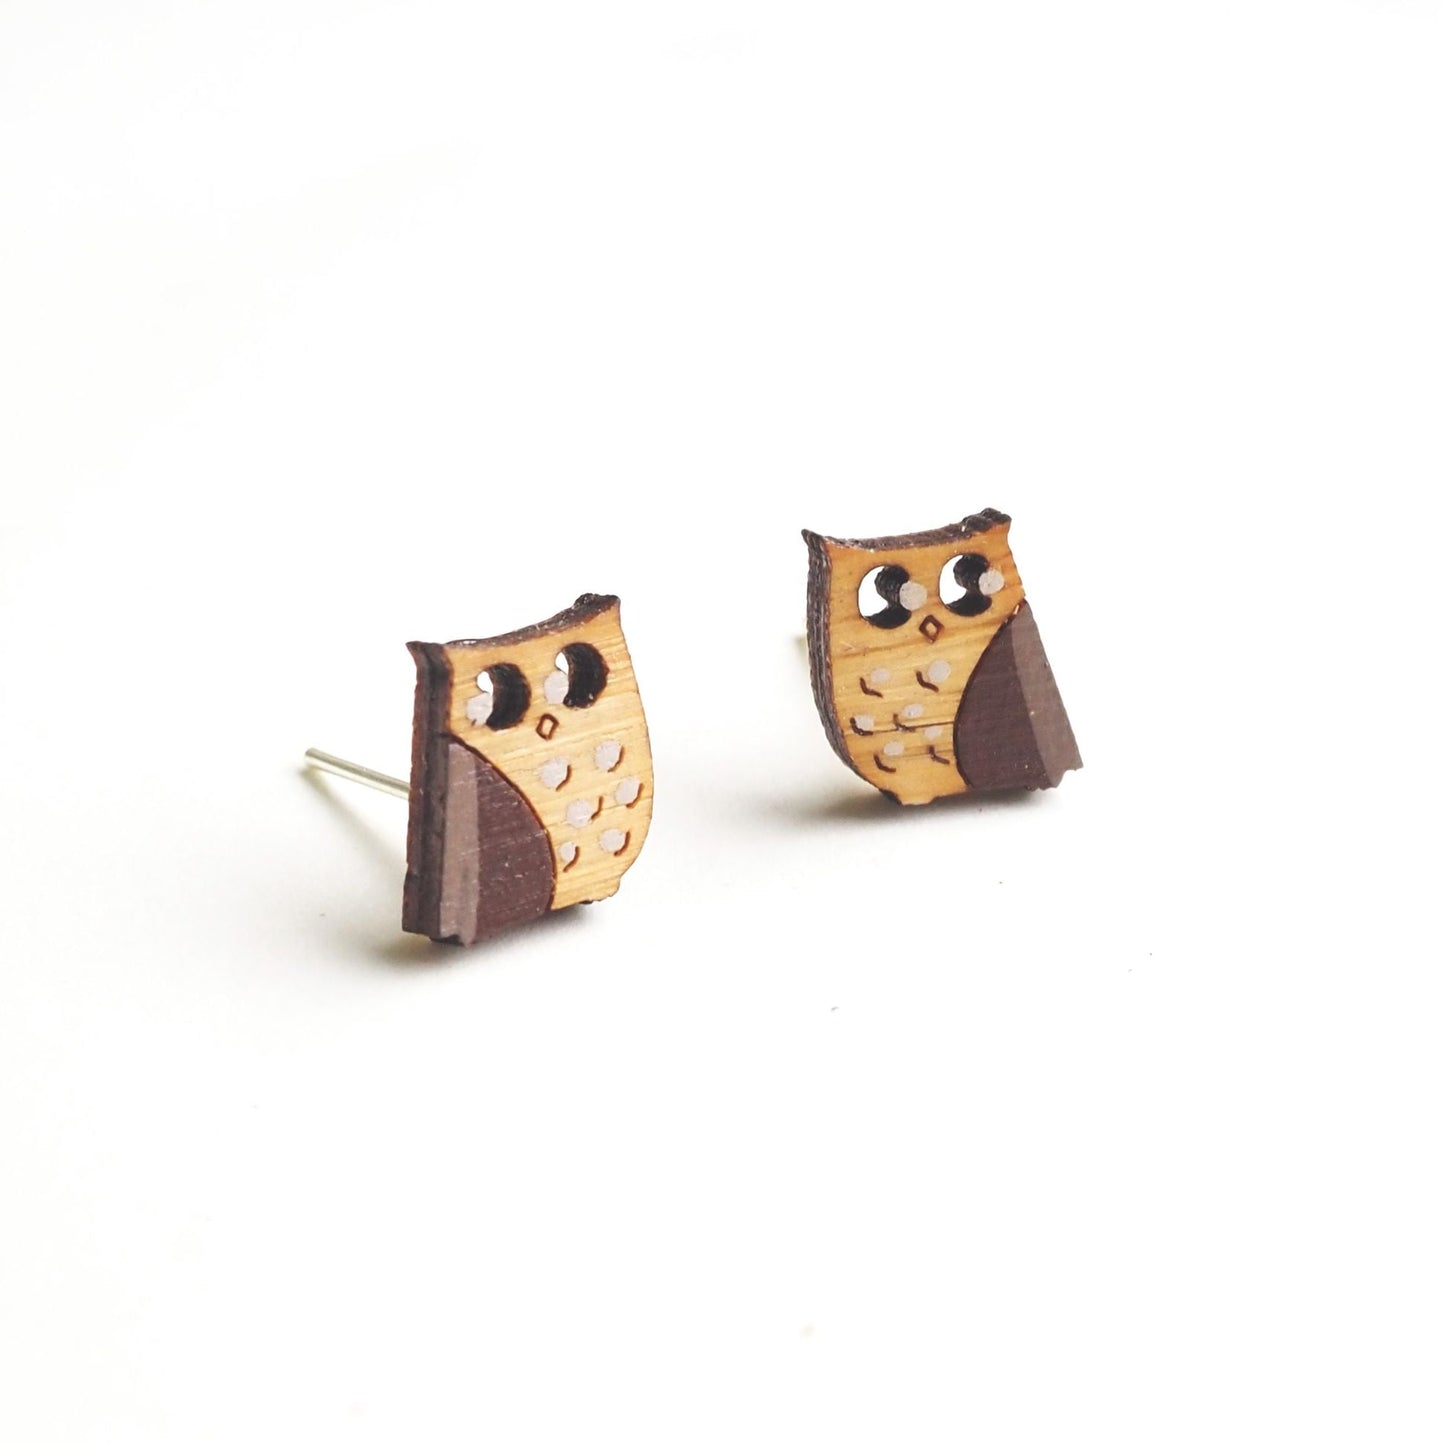 Load image into Gallery viewer, The owl earrings side by side against a white background.
